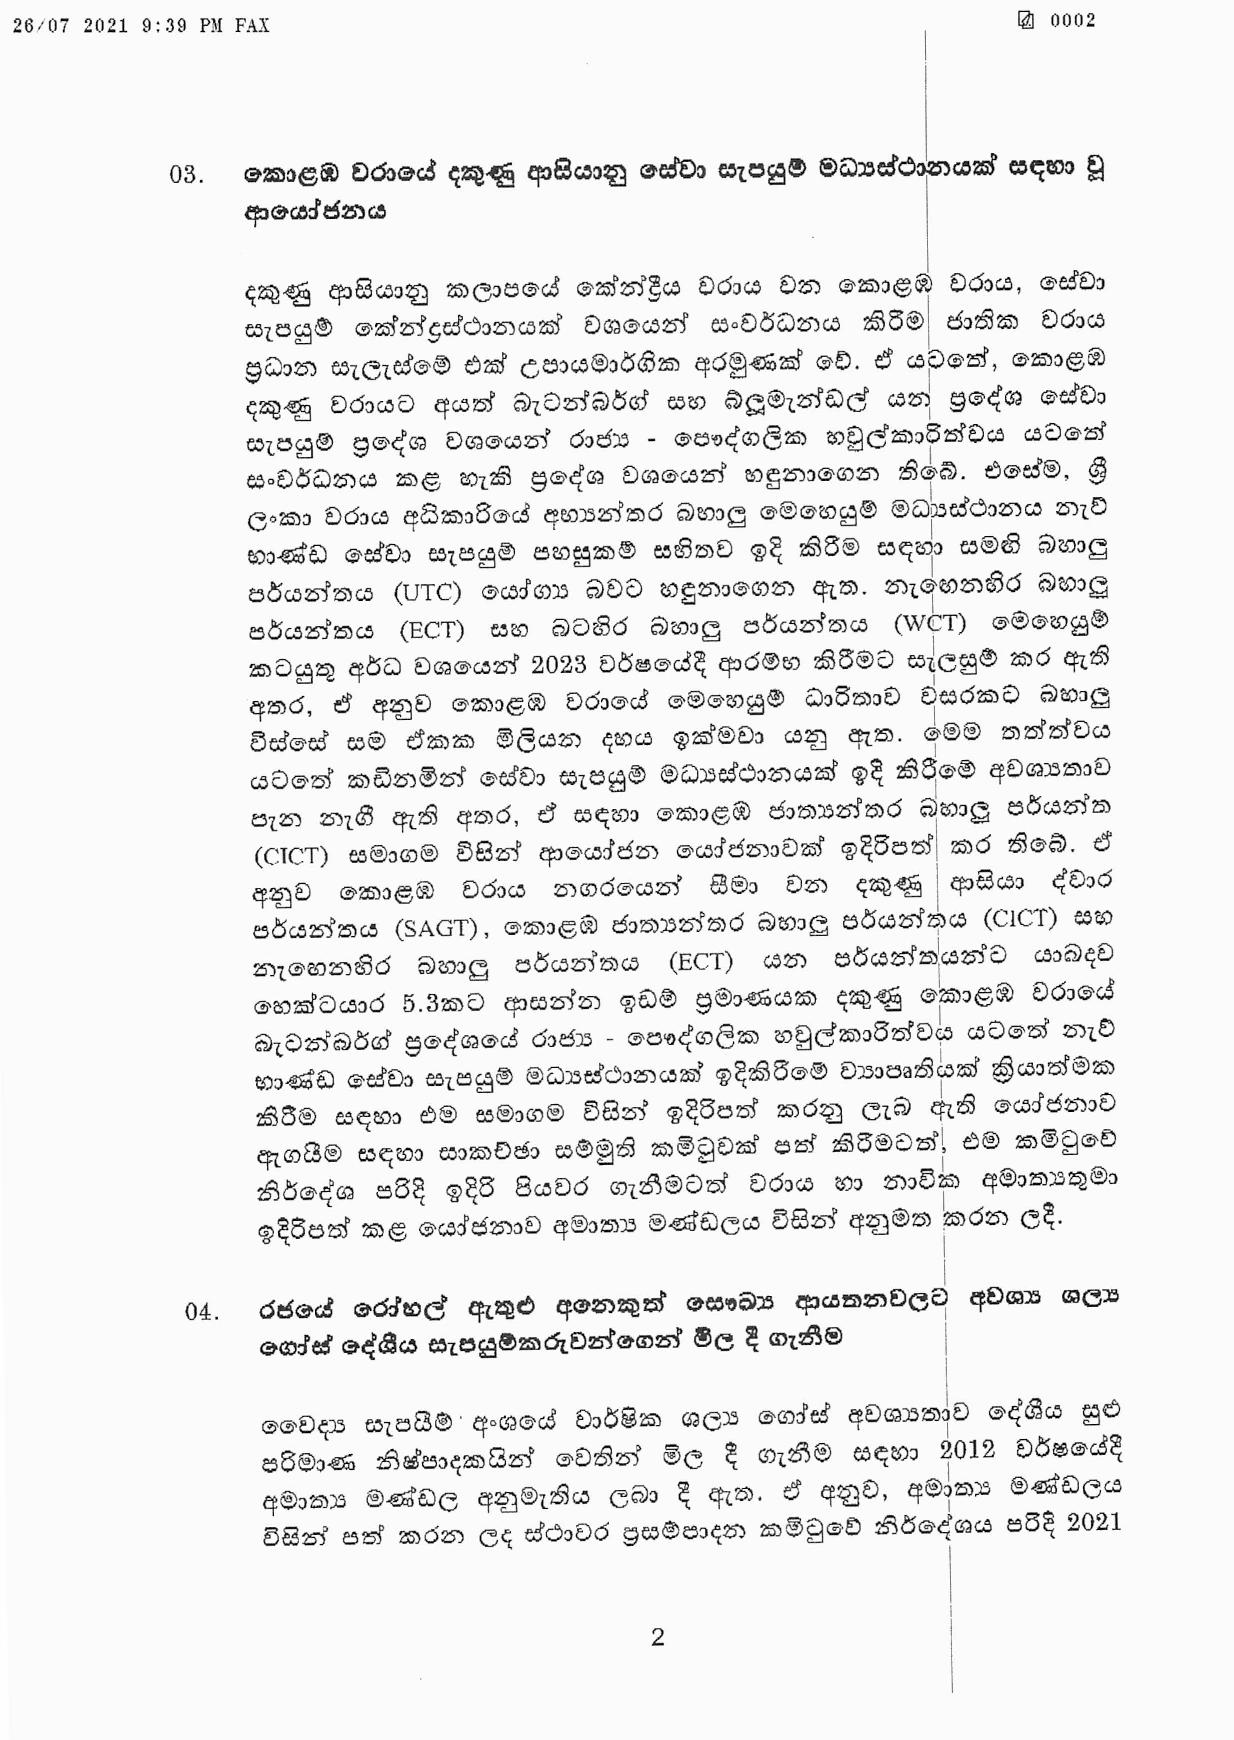 Cabinet Decision on 26.07.2021 page 002